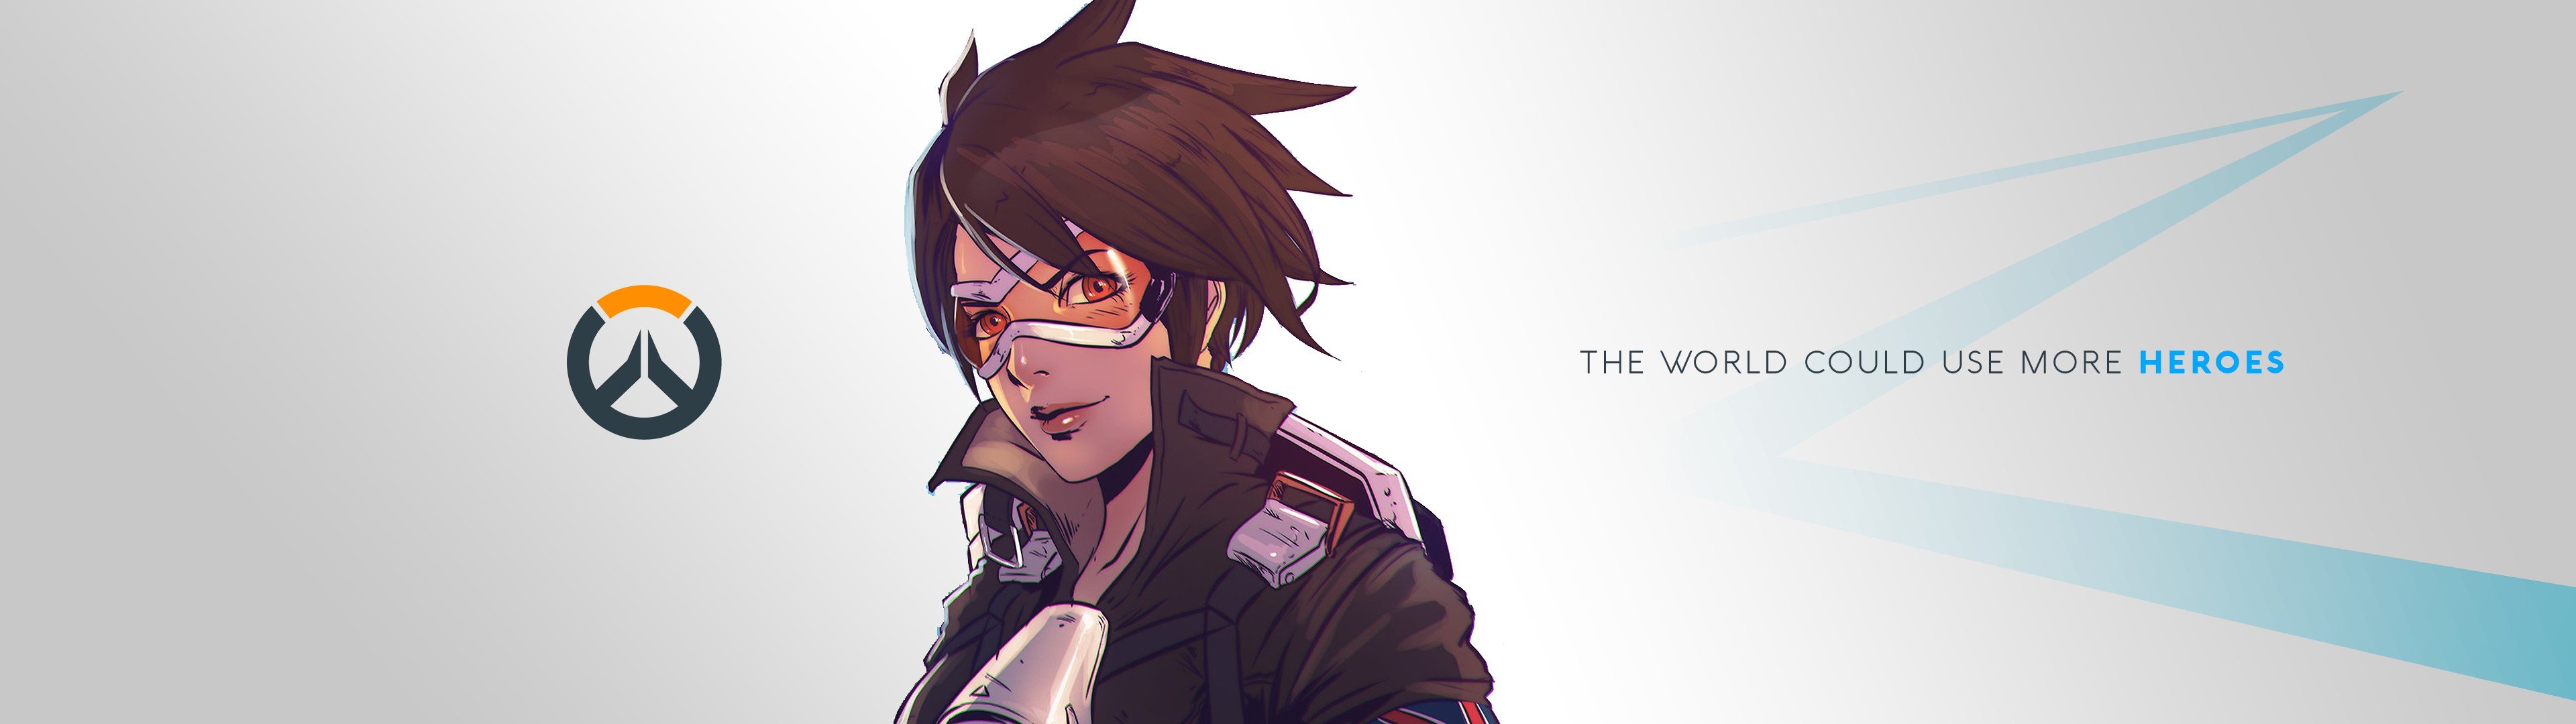 multiple display, Tracer (Overwatch), Video games, Quote, Overwatch Wallpaper